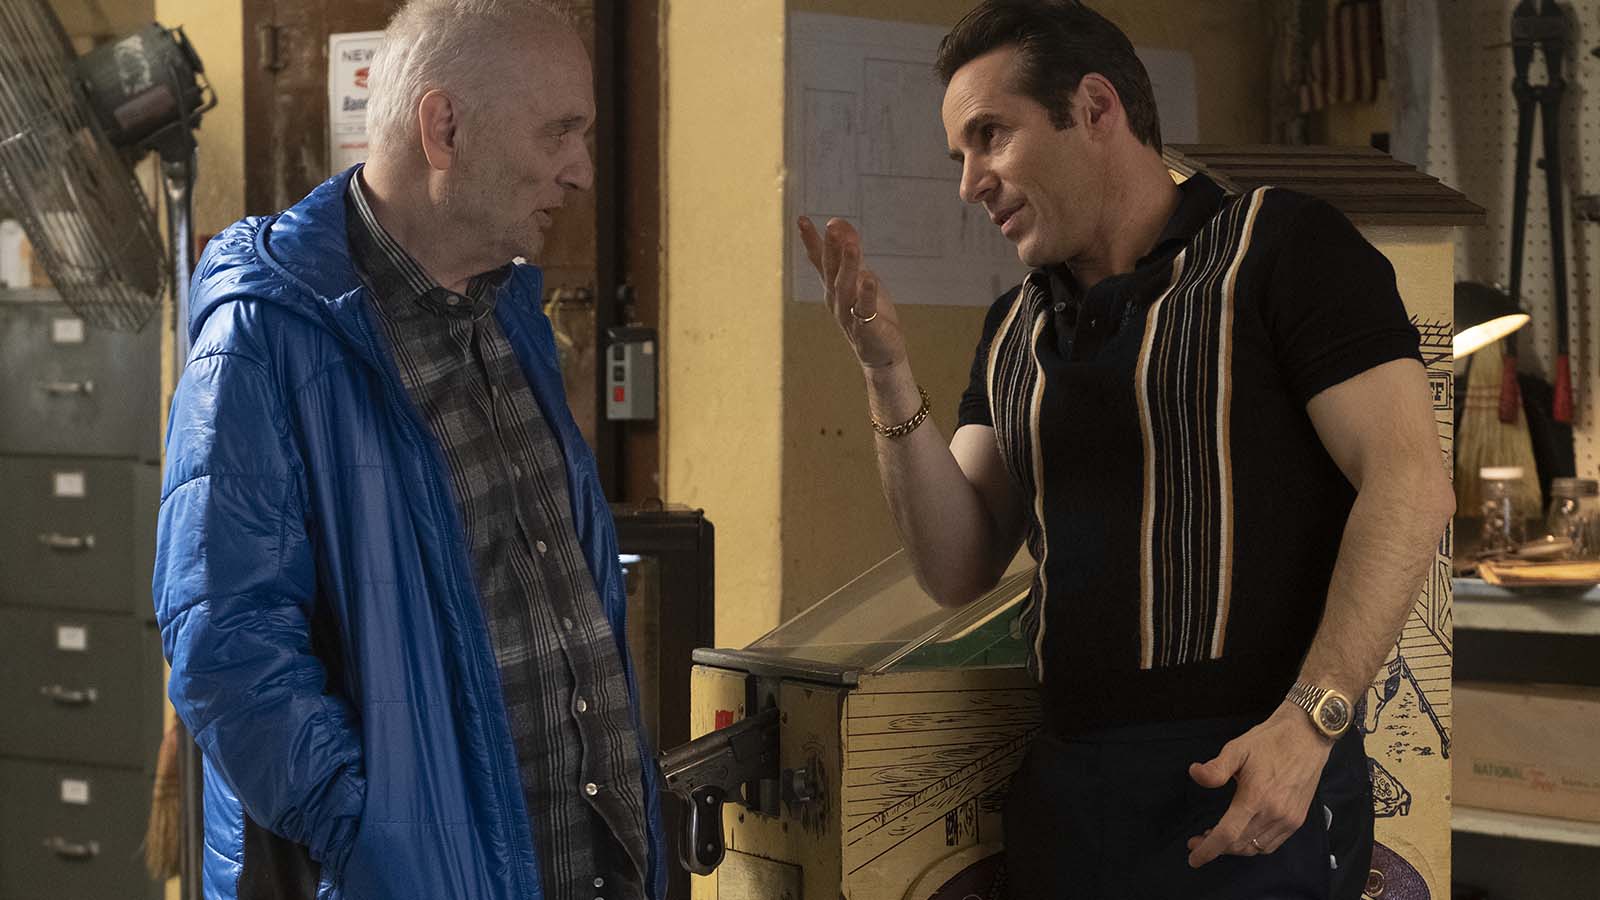 Writer/producer David Chase takes a moment with Alessandro Nivola on the set of The Many Saints of Newark. Image © Warner Bros.